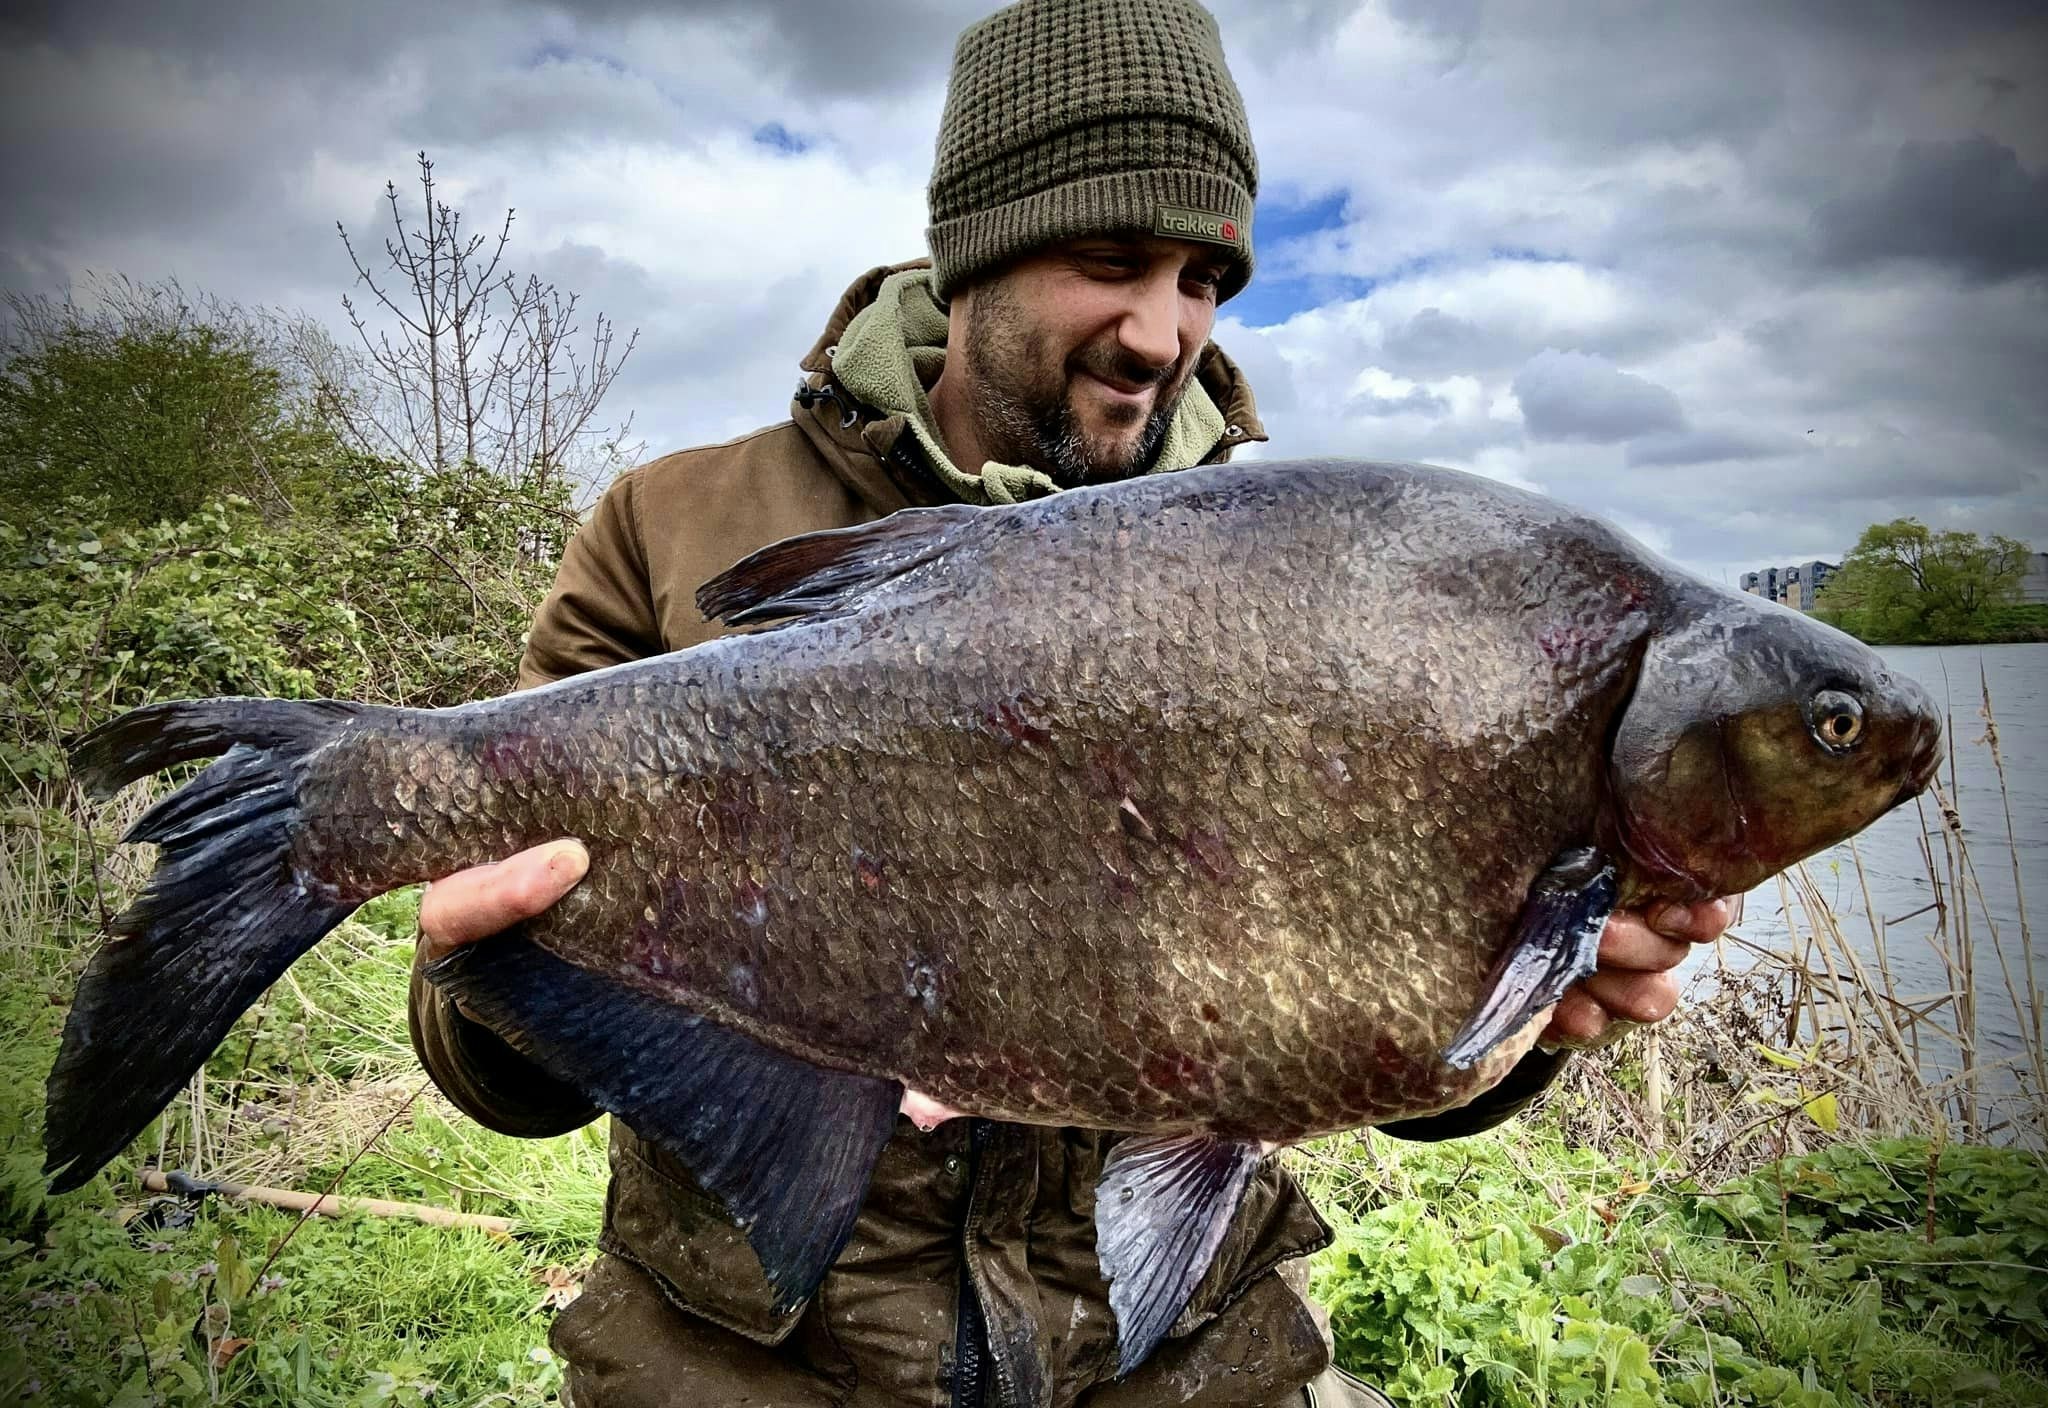 Another double figure bream from a remarkable session.